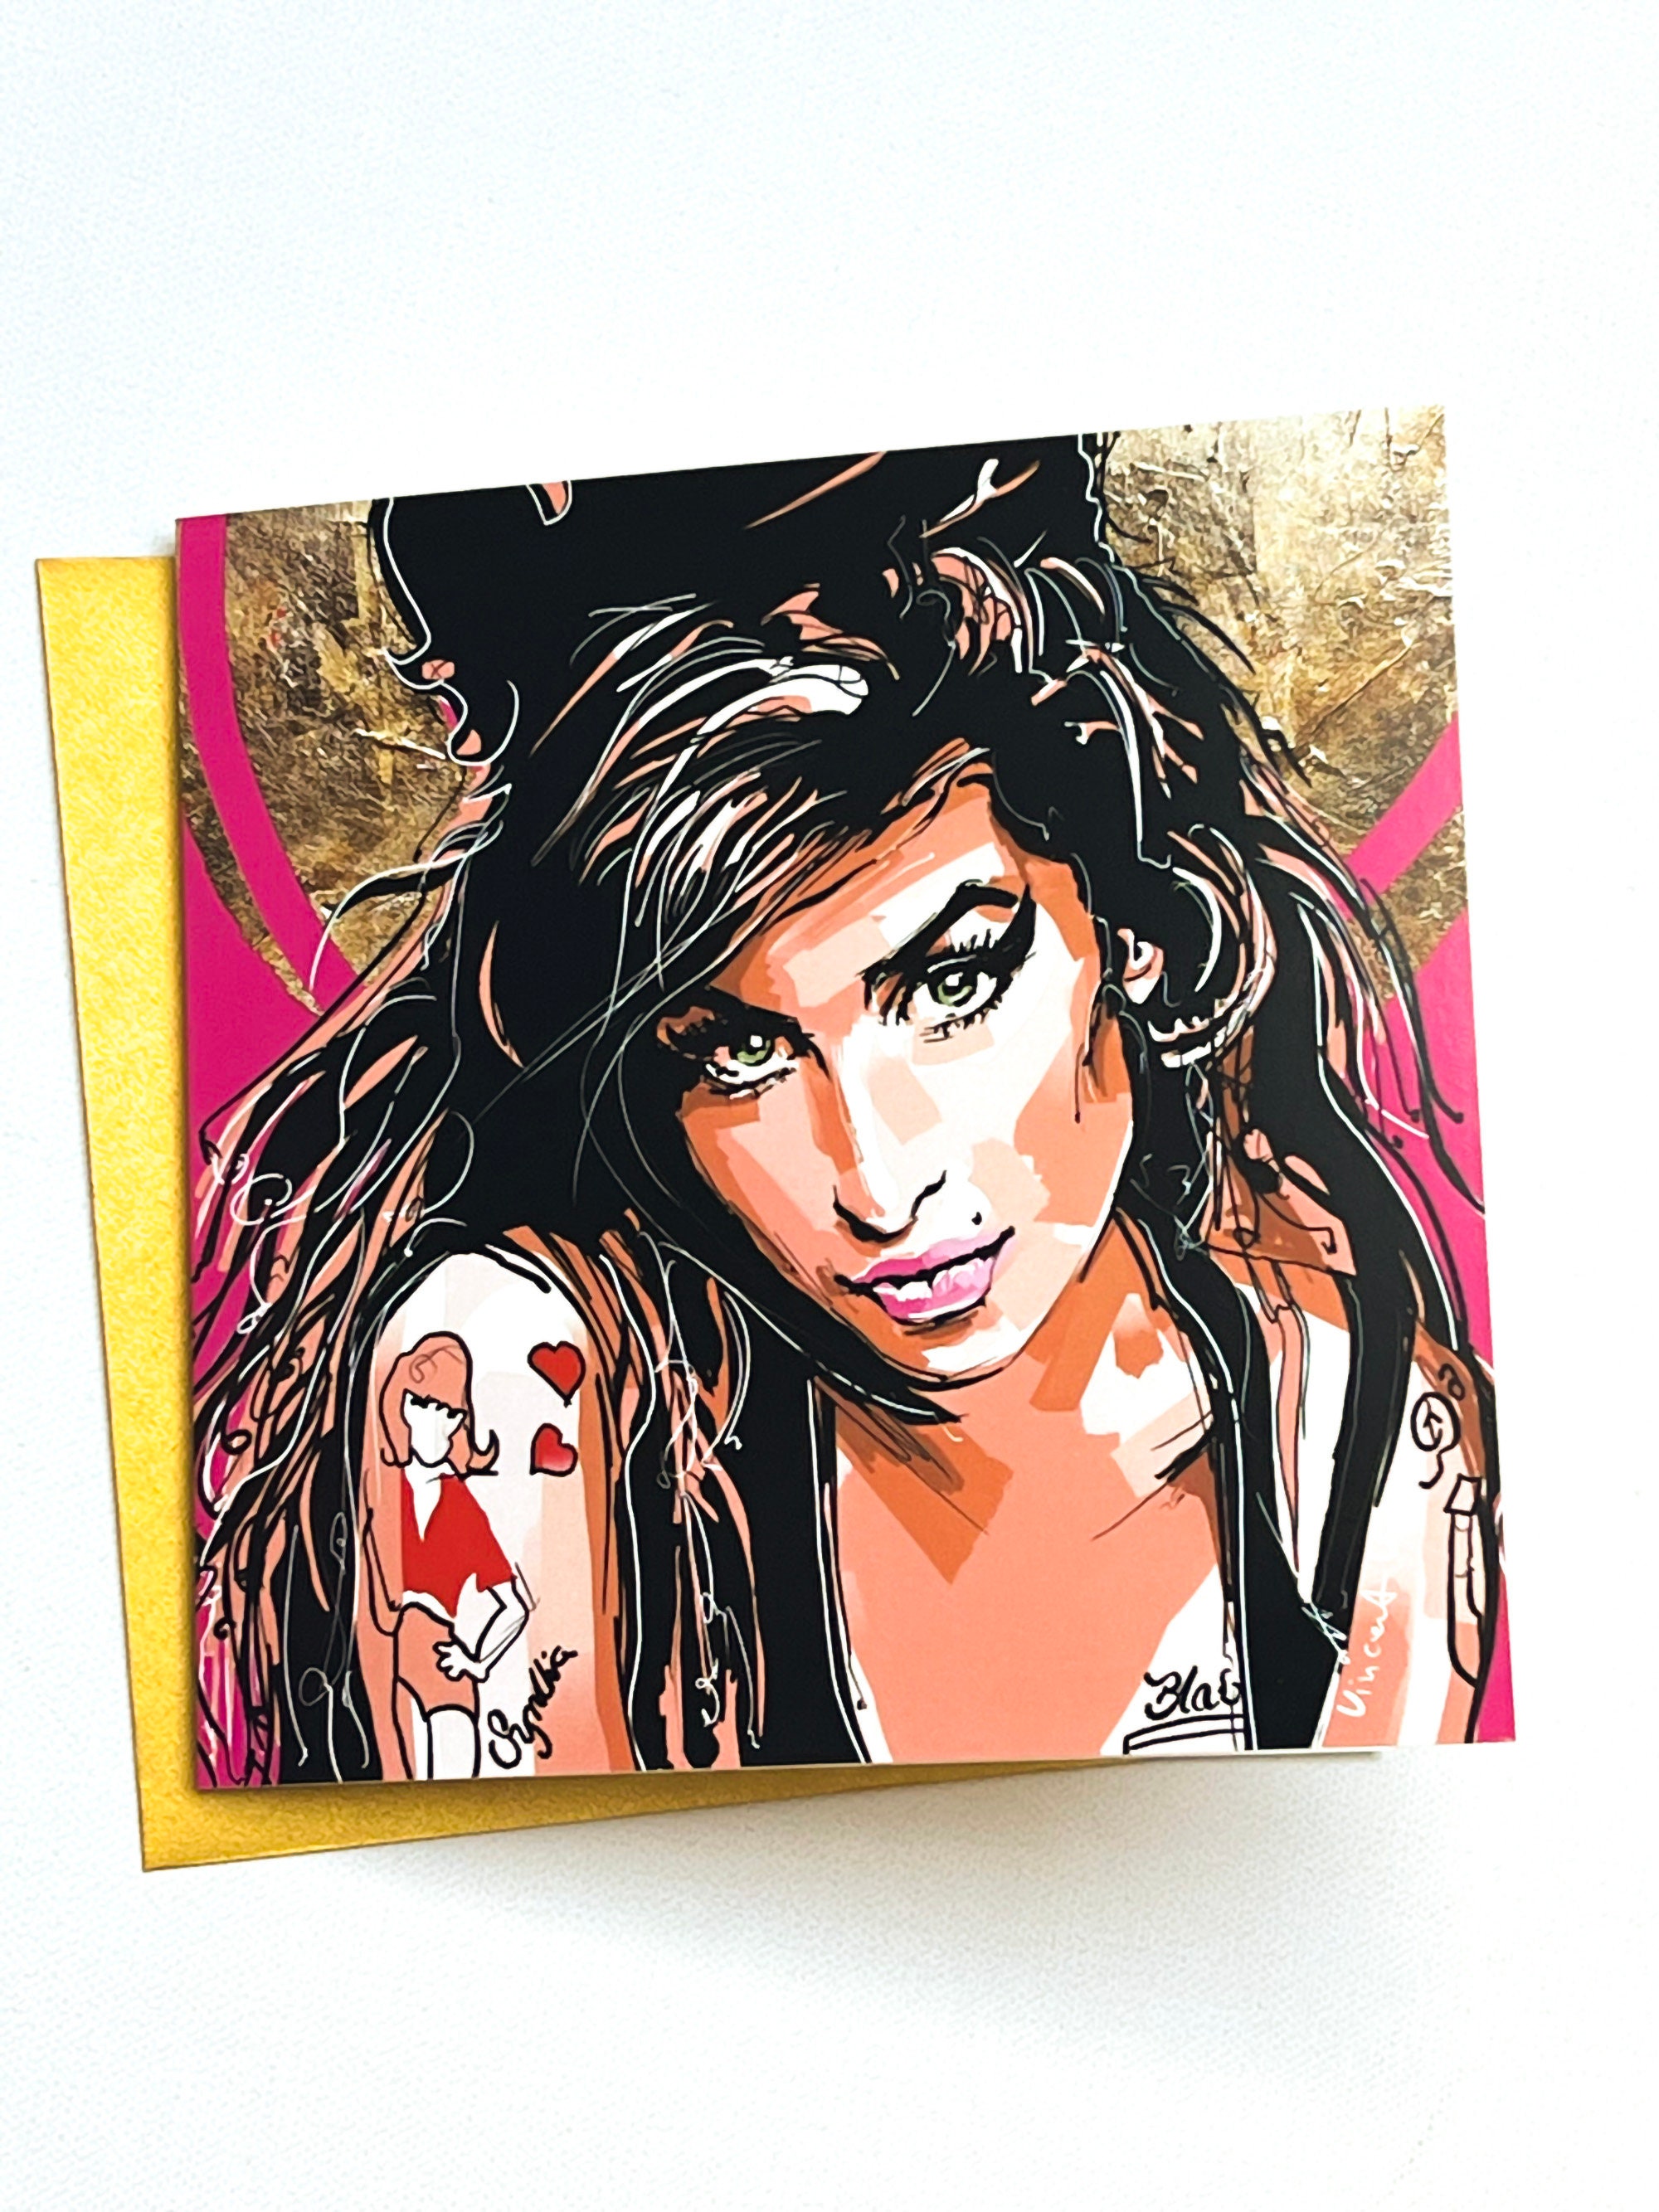 Amy Winehouse Greetings Card or Modern Pop Art Print. Perfect for Birthday  Card or Any Occasion for Amy Music Fans 